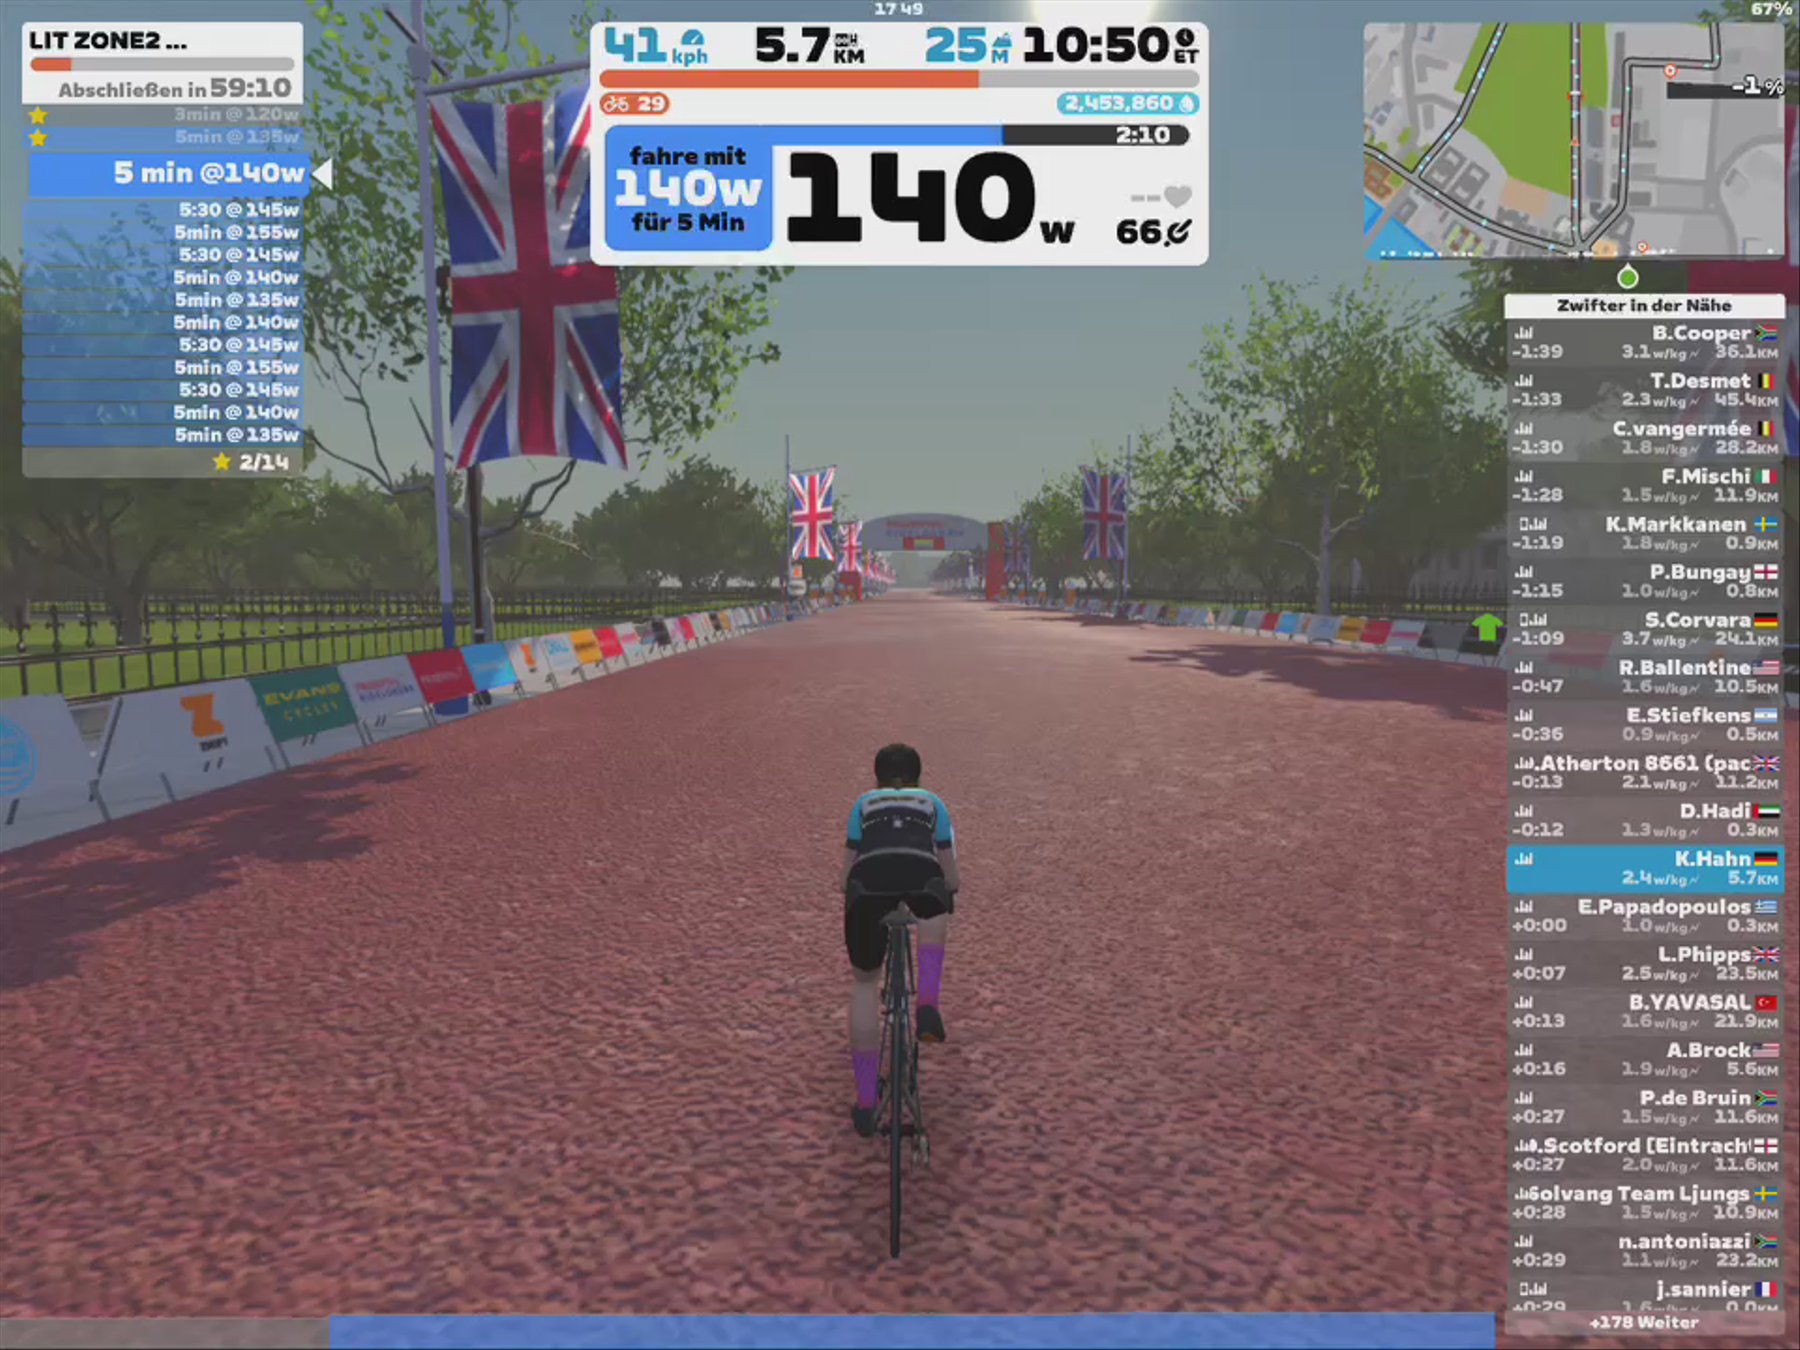 Zwift - LIT ZONE2 PYRAMIDES // 1:10H in London